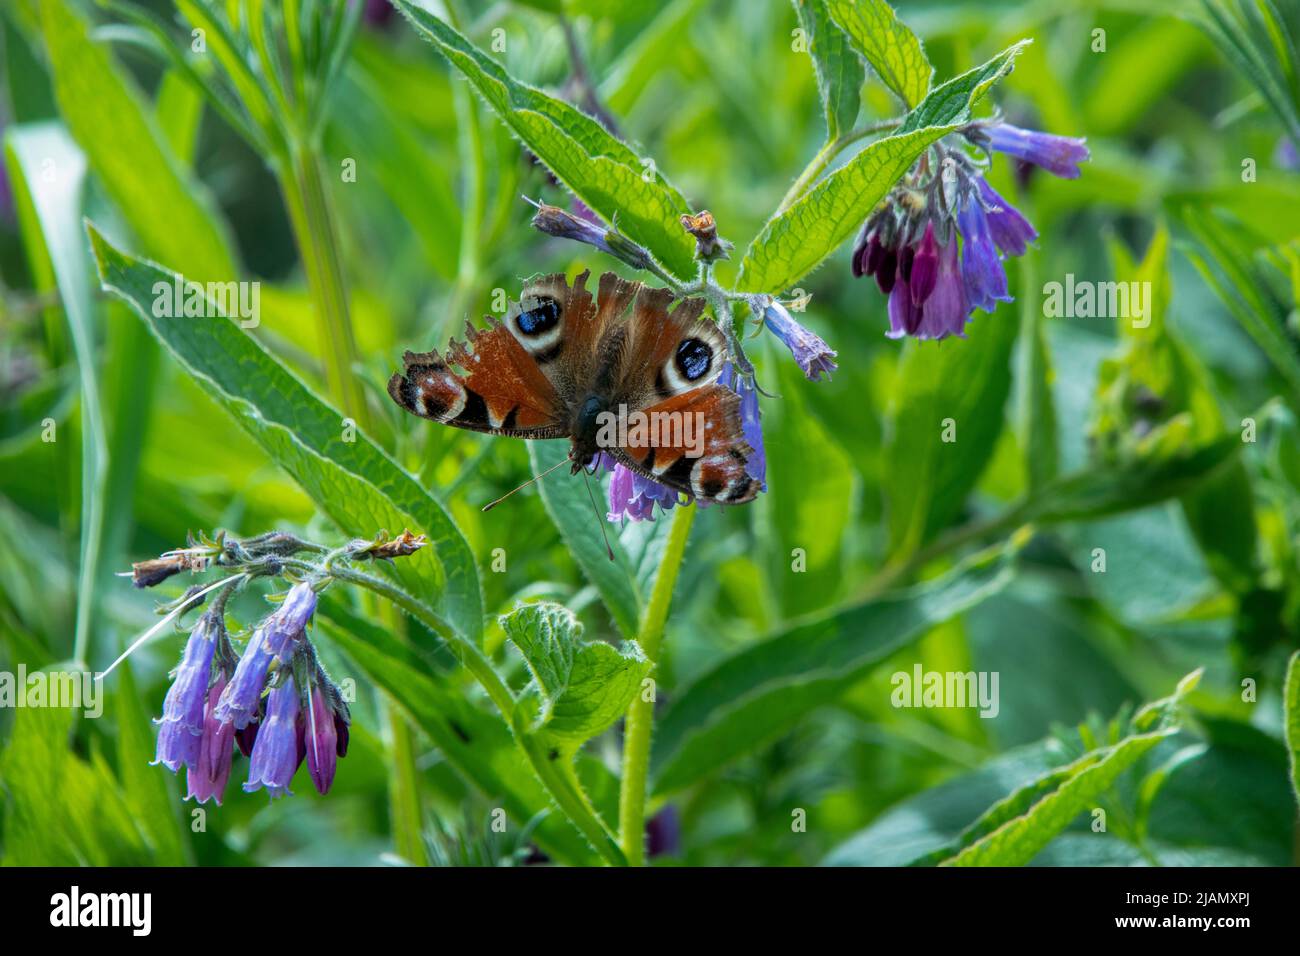 Tattered Peacock butterfly on Comfrey plant Stock Photo